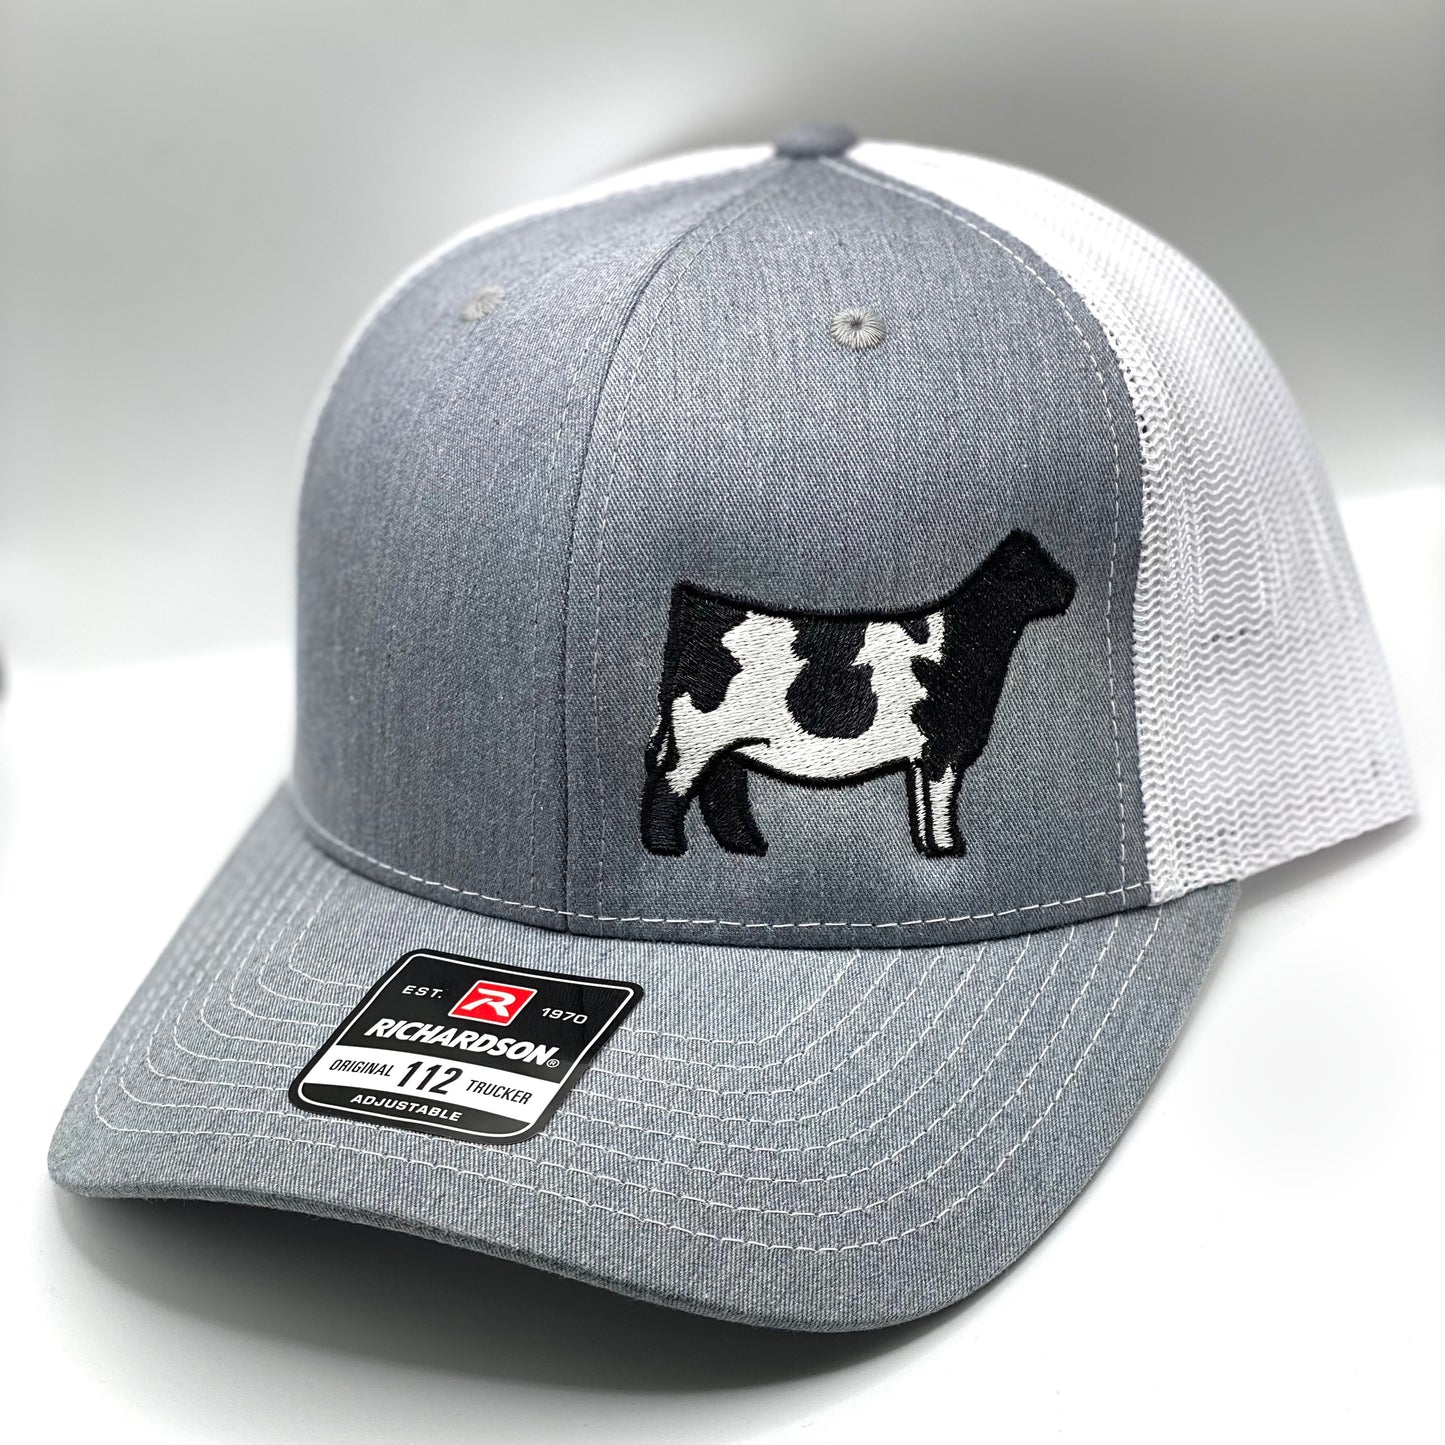 Shorthorn Cattle Embroidered Hat